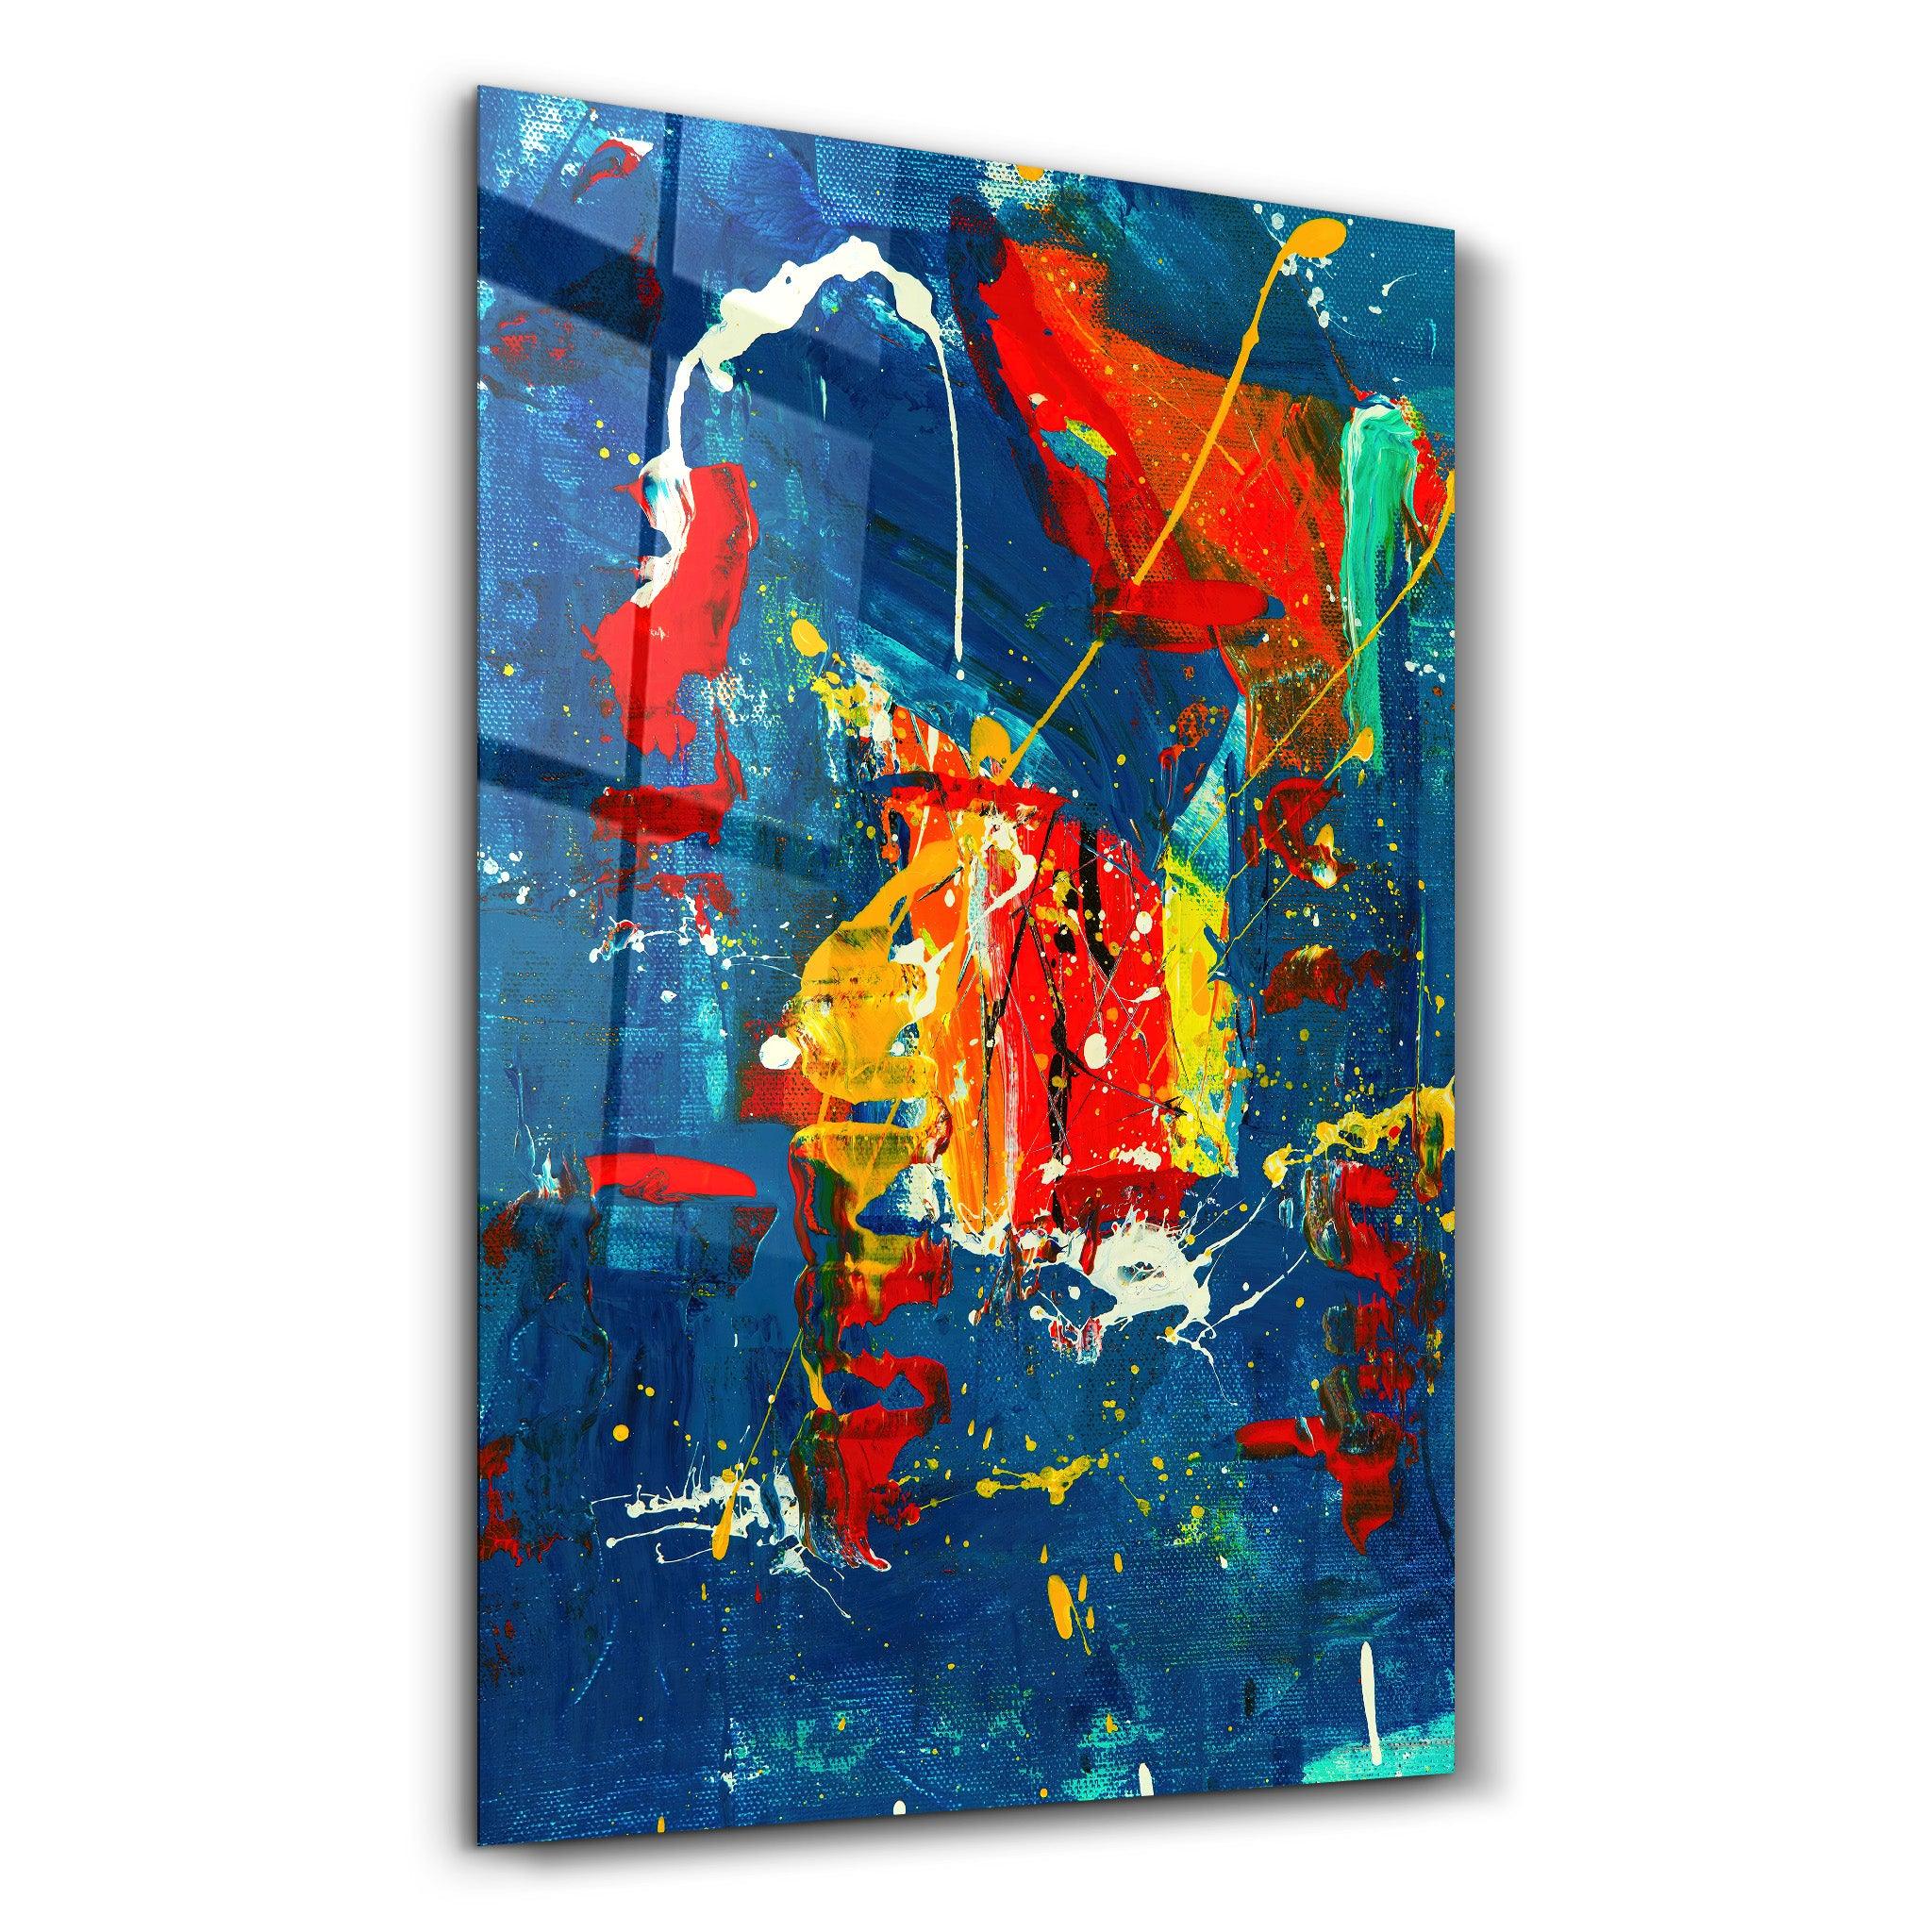 Oil Painting - Abstract | Designer's Collection Glass Wall Art - ArtDesigna Glass Printing Wall Art